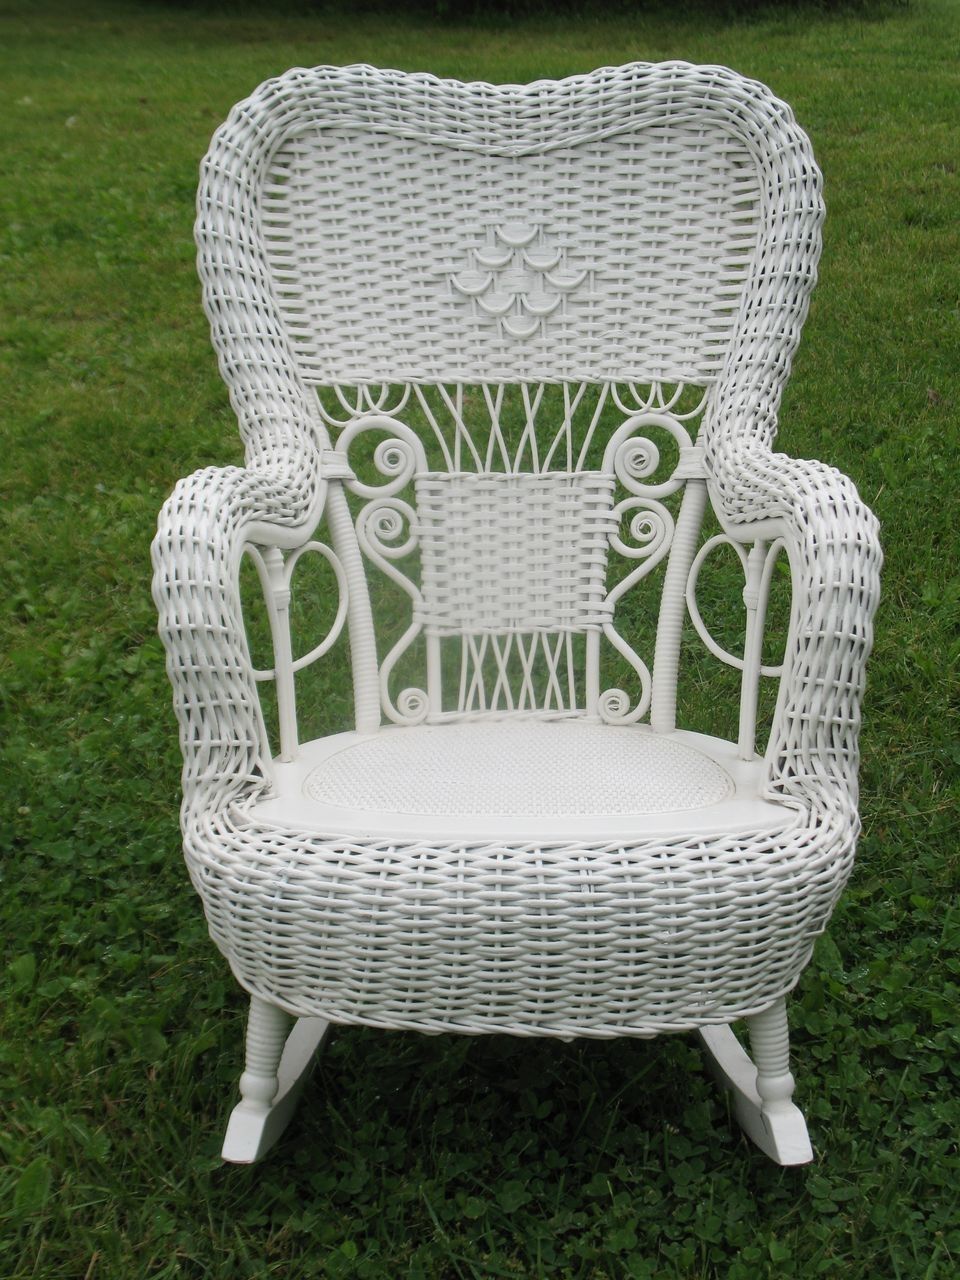 Chair Wicker Porch Rockers Outdoor Furniture Wooden Garden Rocking Within White Resin Patio Rocking Chairs 